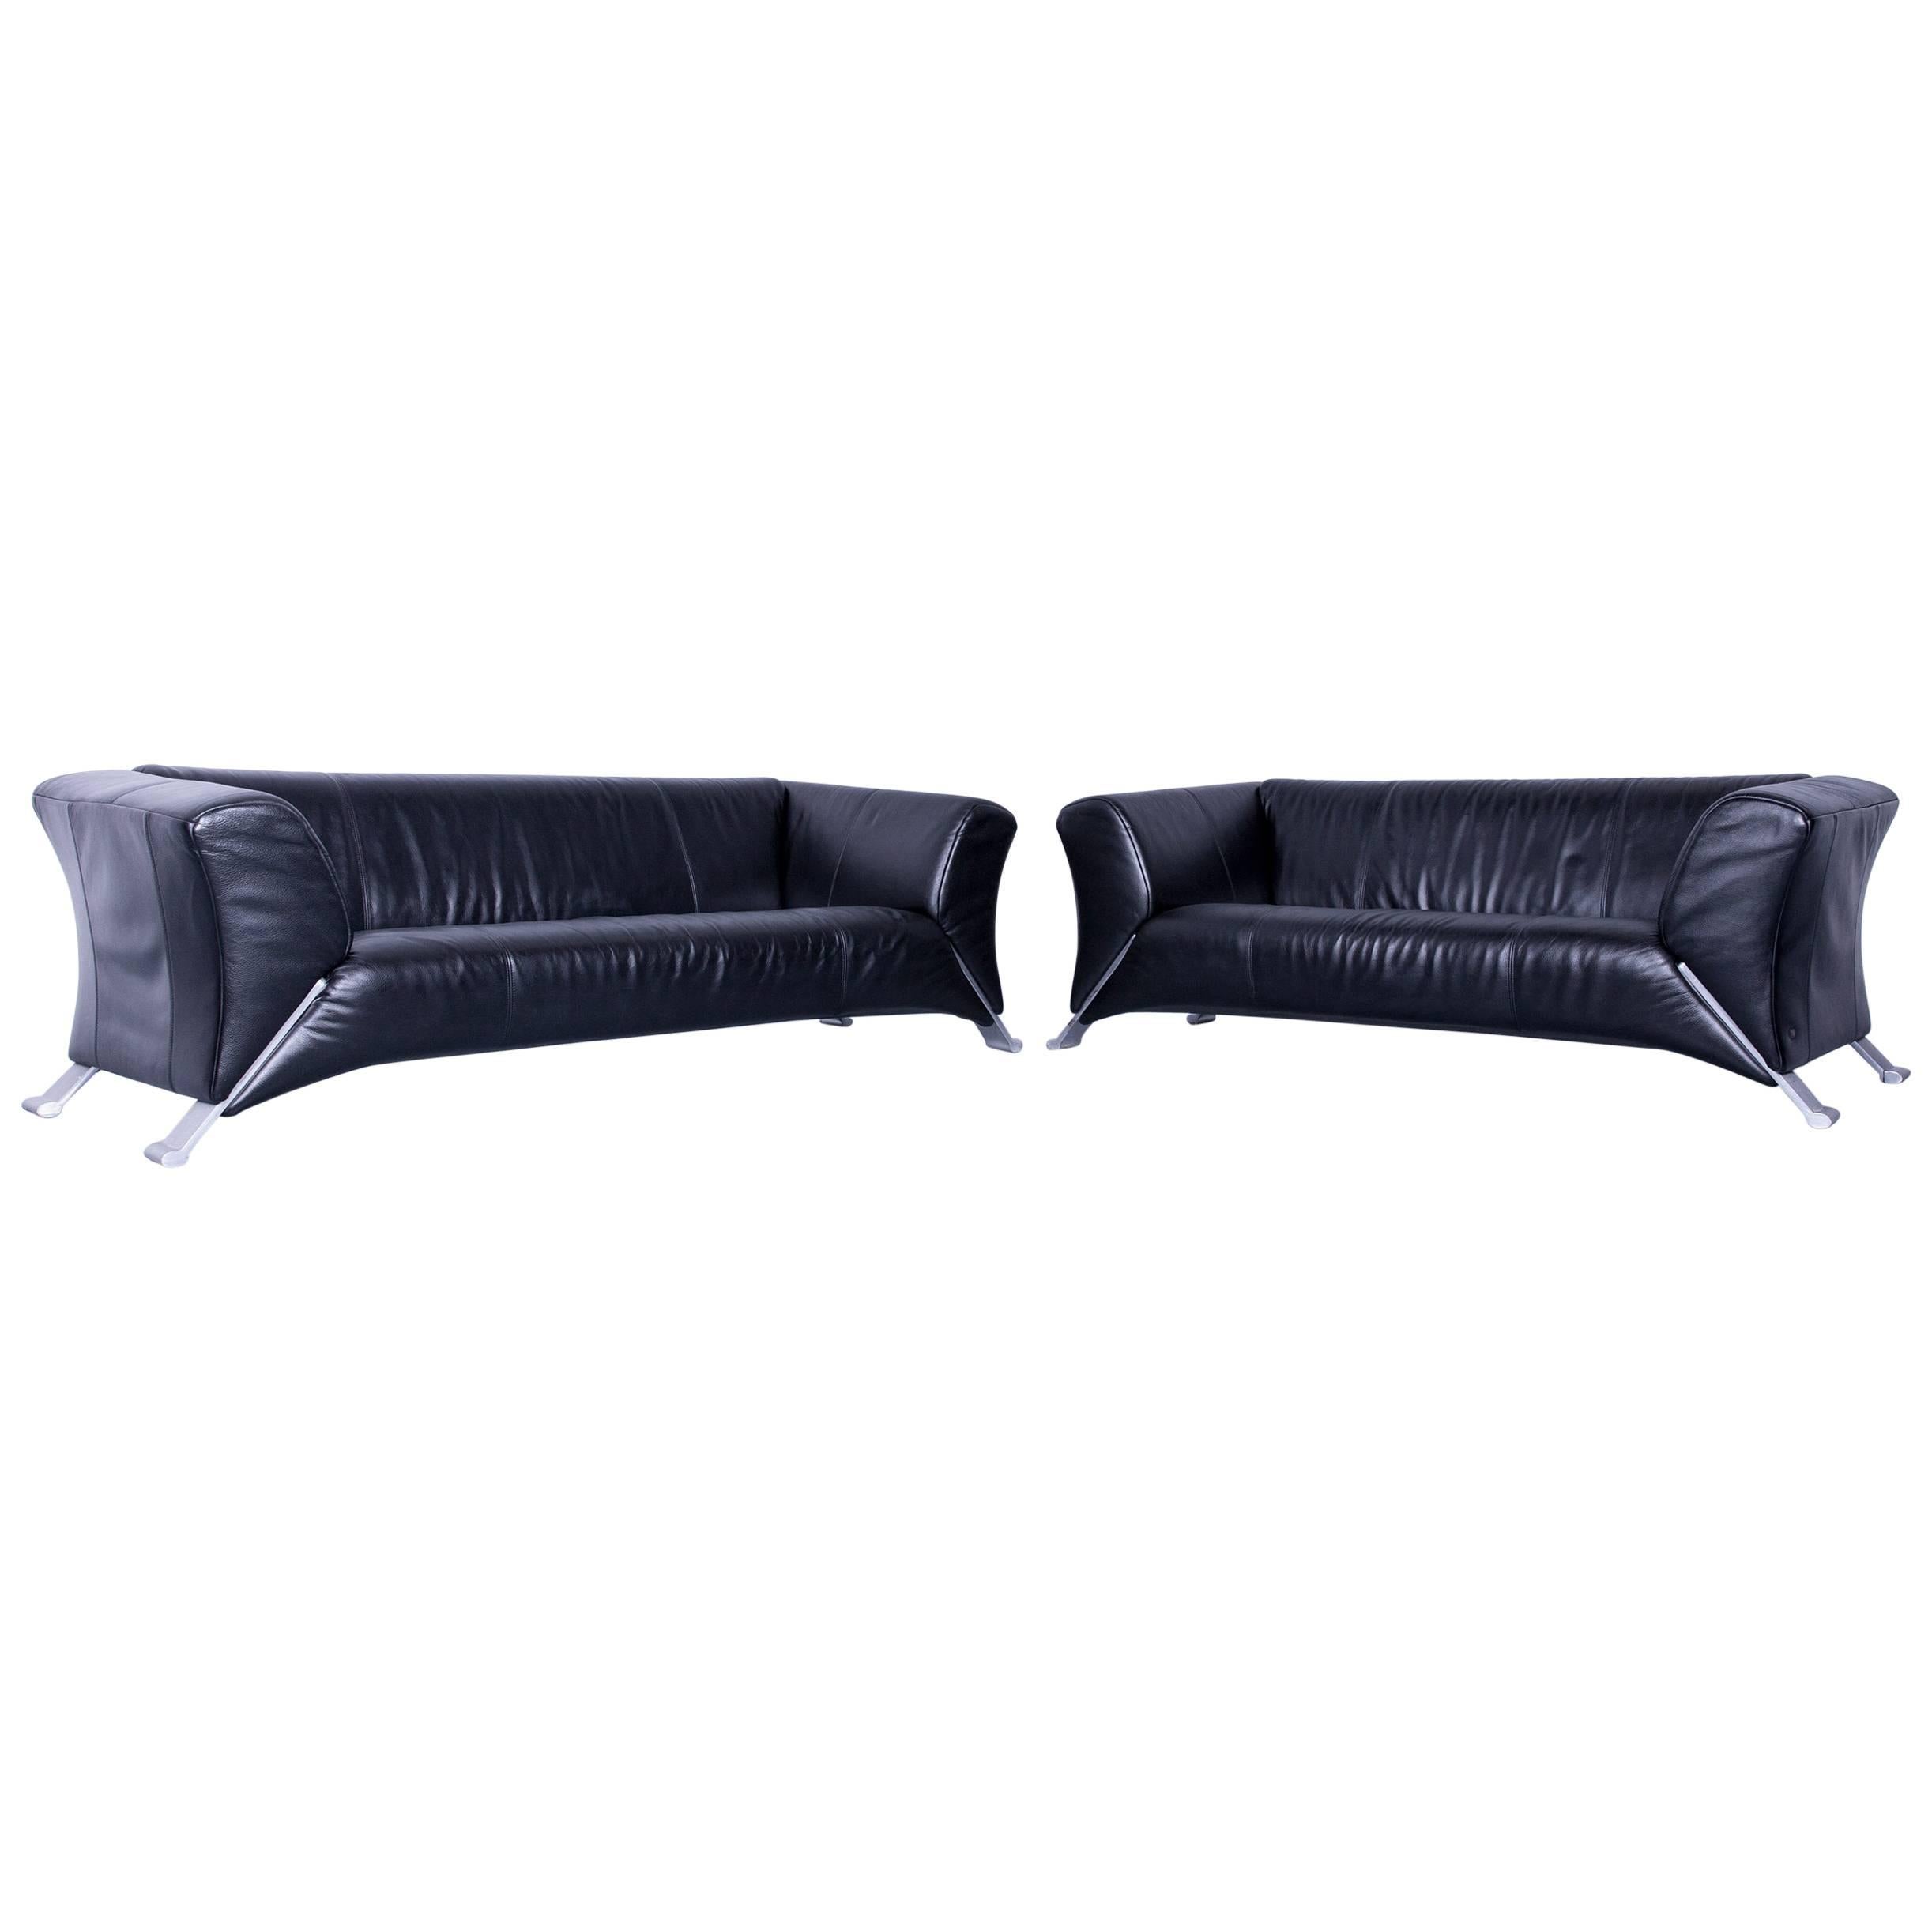 Set of Two Rolf Benz 322 Designer Sofa Black Three and Two-Seat Leather Couch For Sale